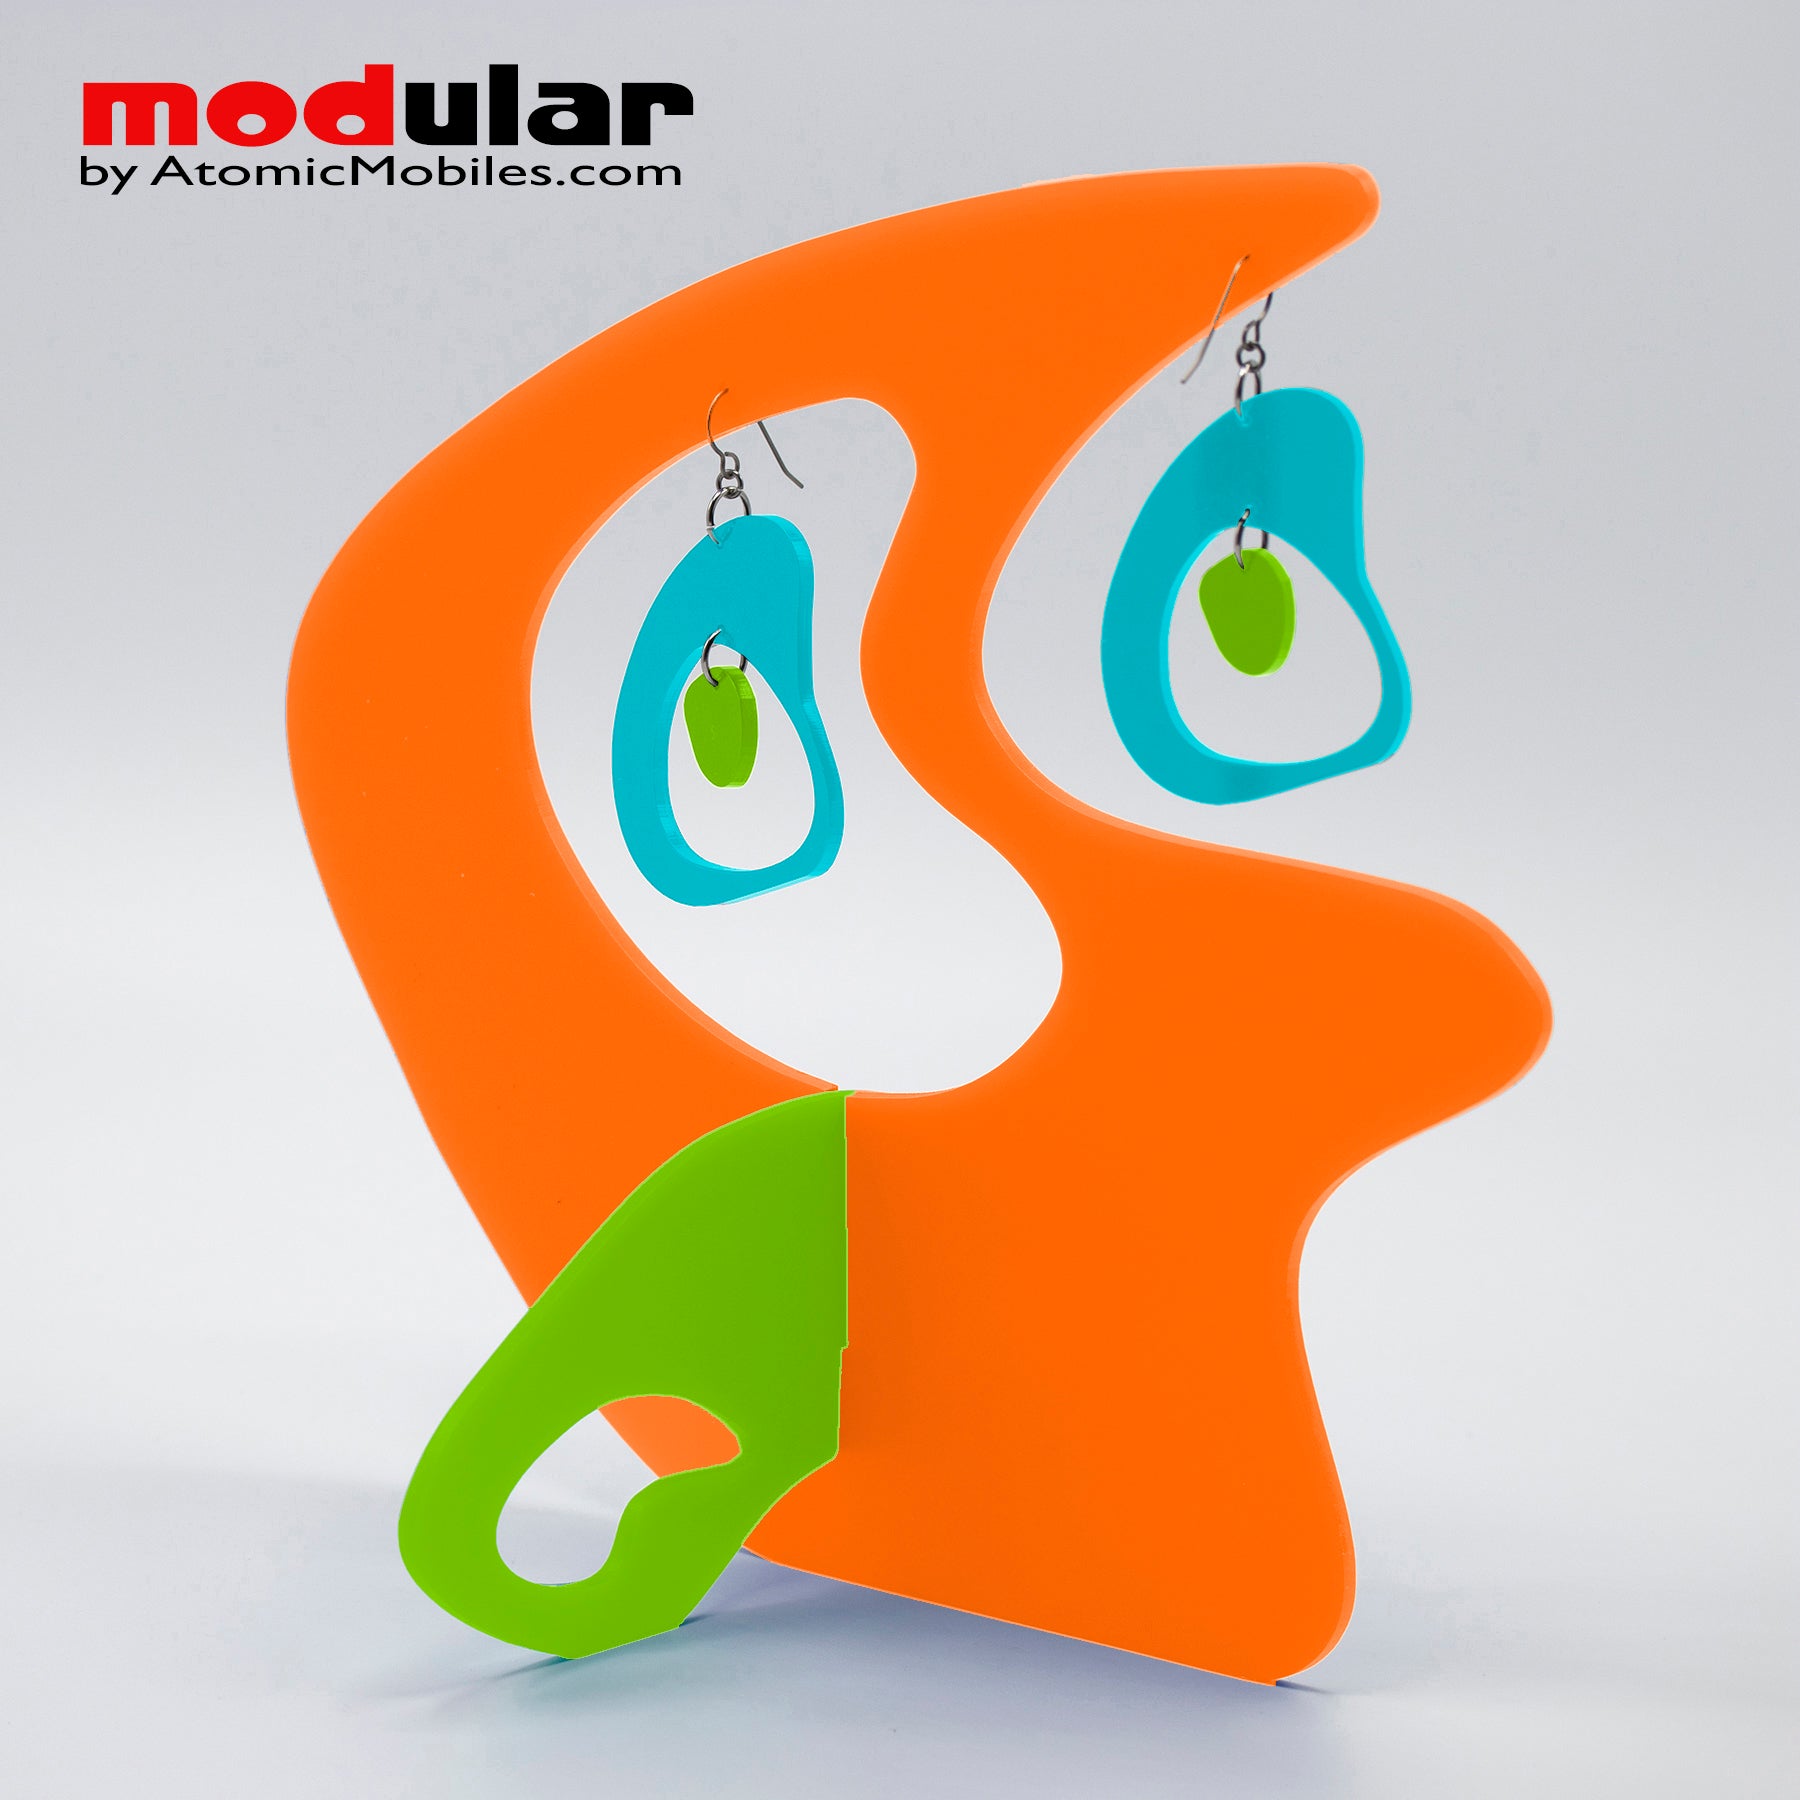 Handmade Boomerang Retro style earrings and stabile kinetic modern art sculpture in Orange Aqua and Lime by AtomicMobiles.com